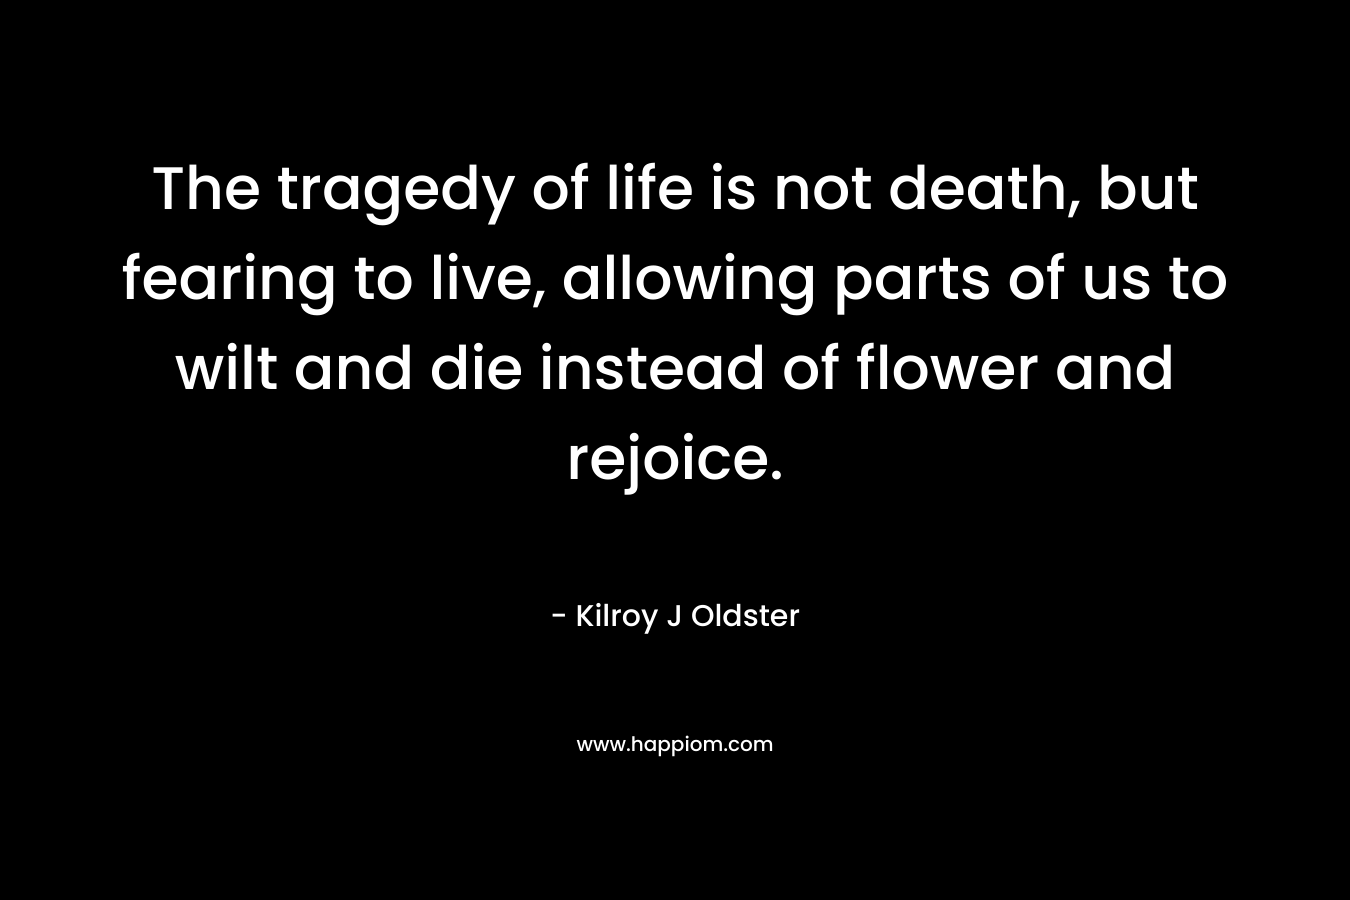 The tragedy of life is not death, but fearing to live, allowing parts of us to wilt and die instead of flower and rejoice.